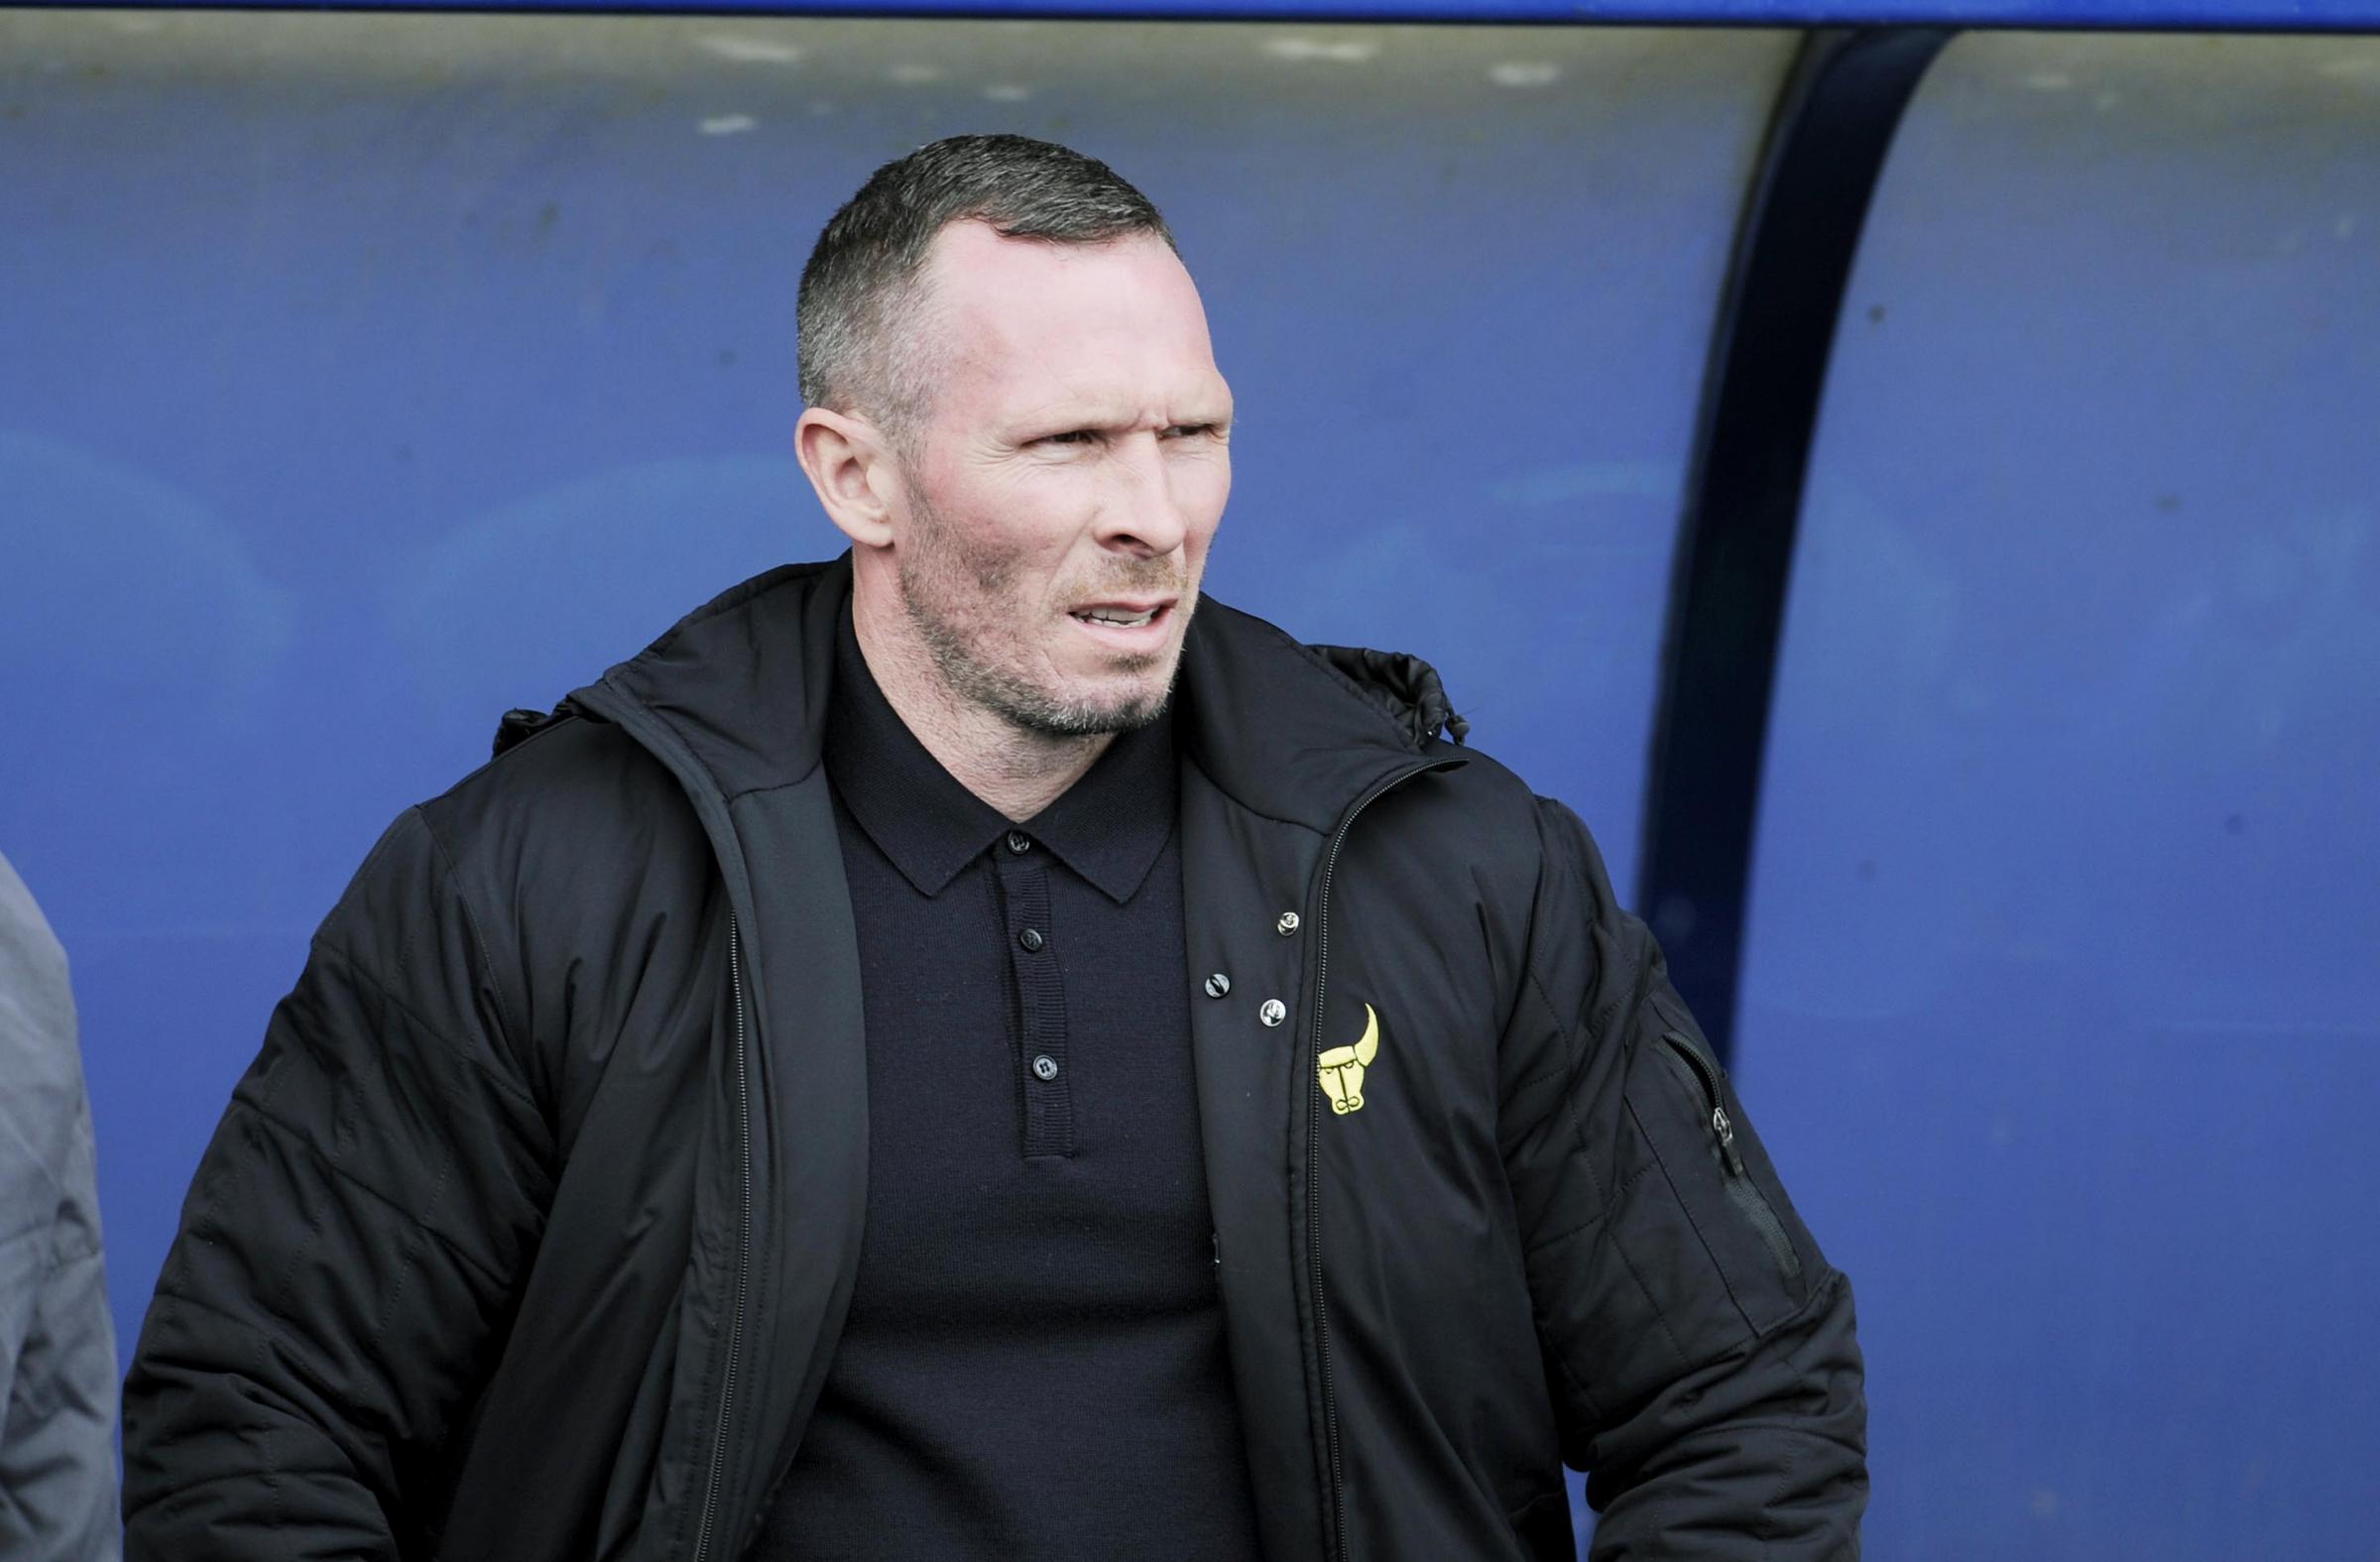 Blackpool appoint ex-Oxford United manager Michael Appleton as head coach